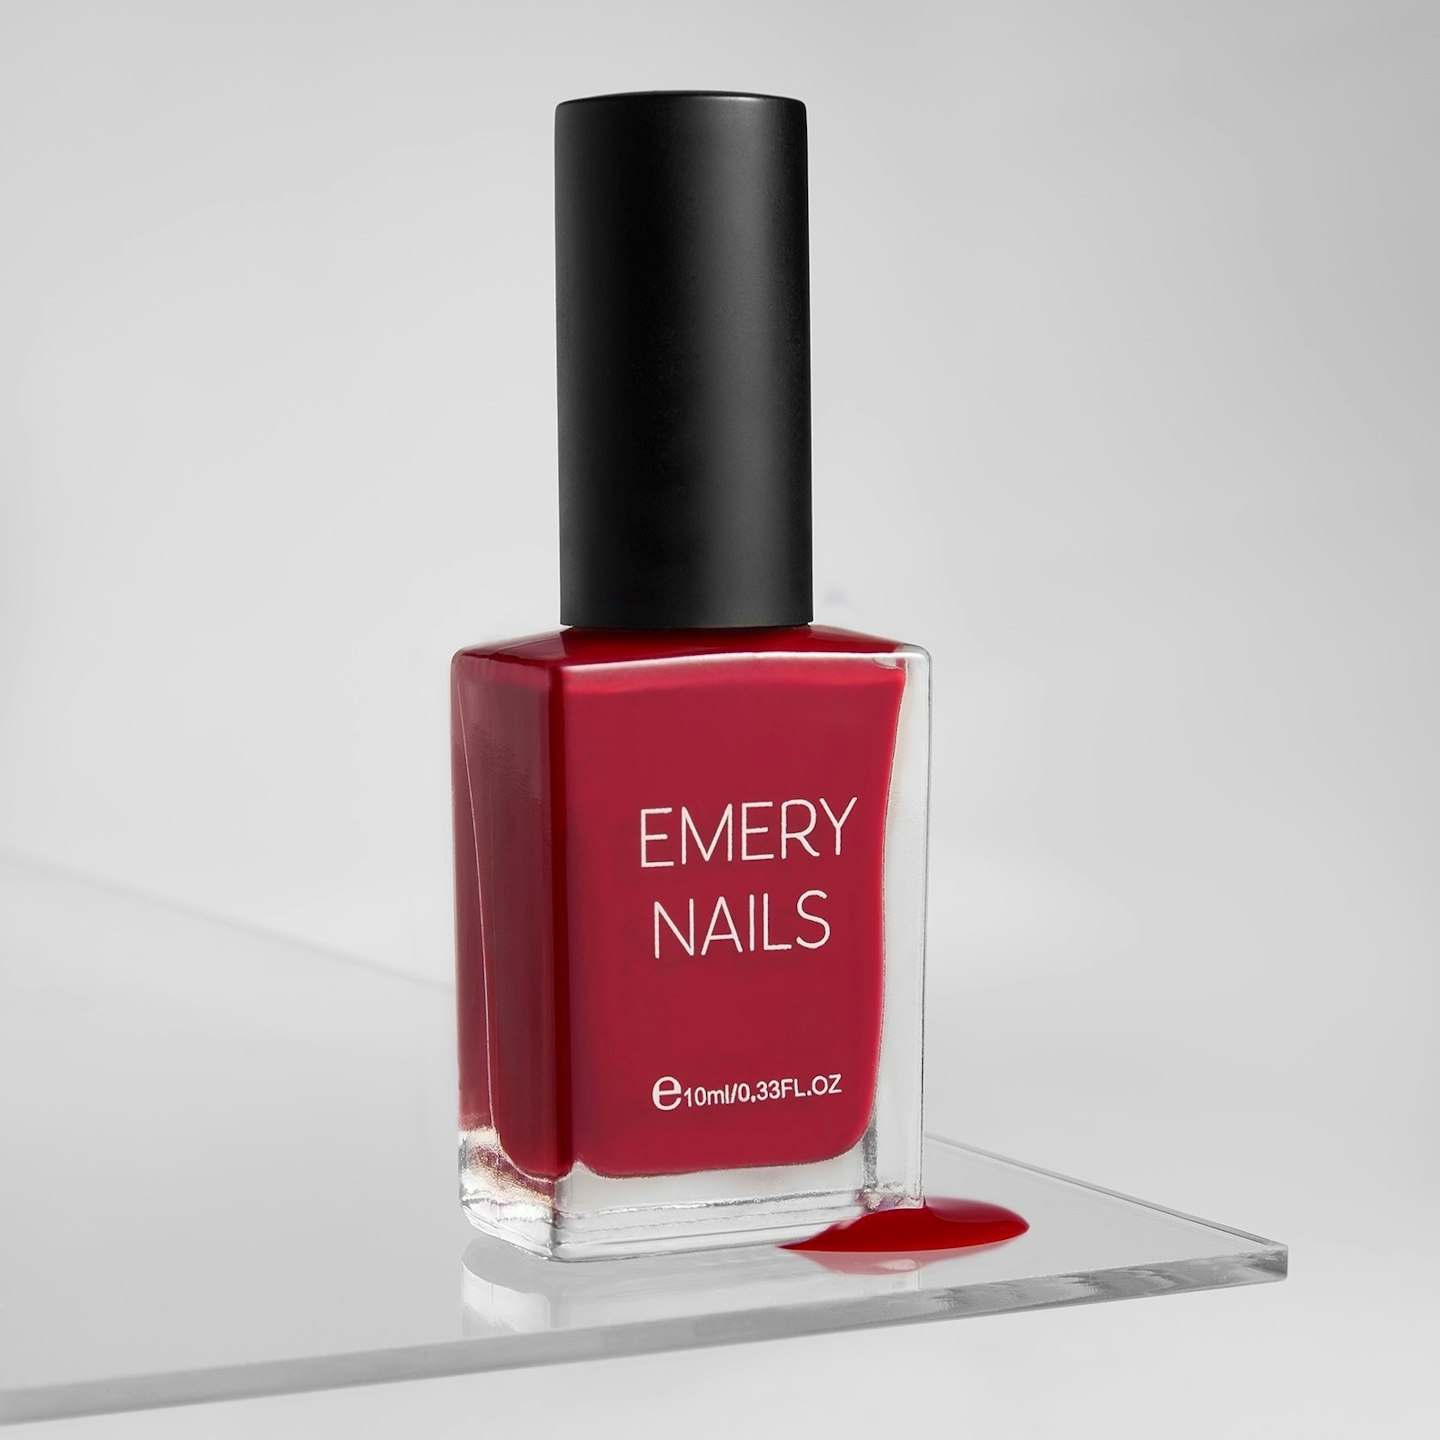 Emery Nails Gloss in Rosso